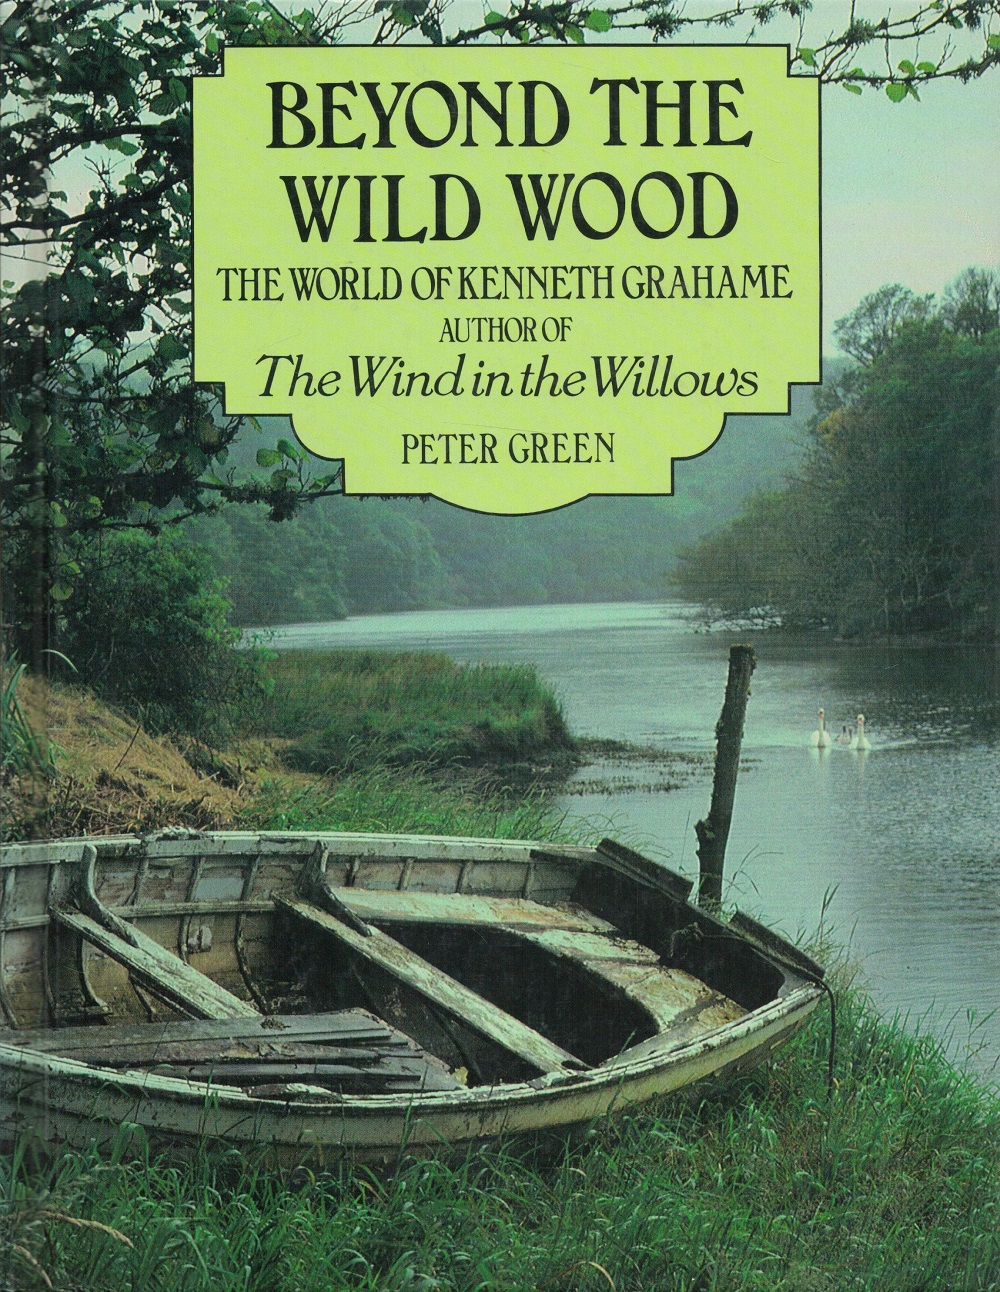 Beyond The Wild Wood The World of Kenneth Grahame by Peter Green Hardback Book 1993 edition